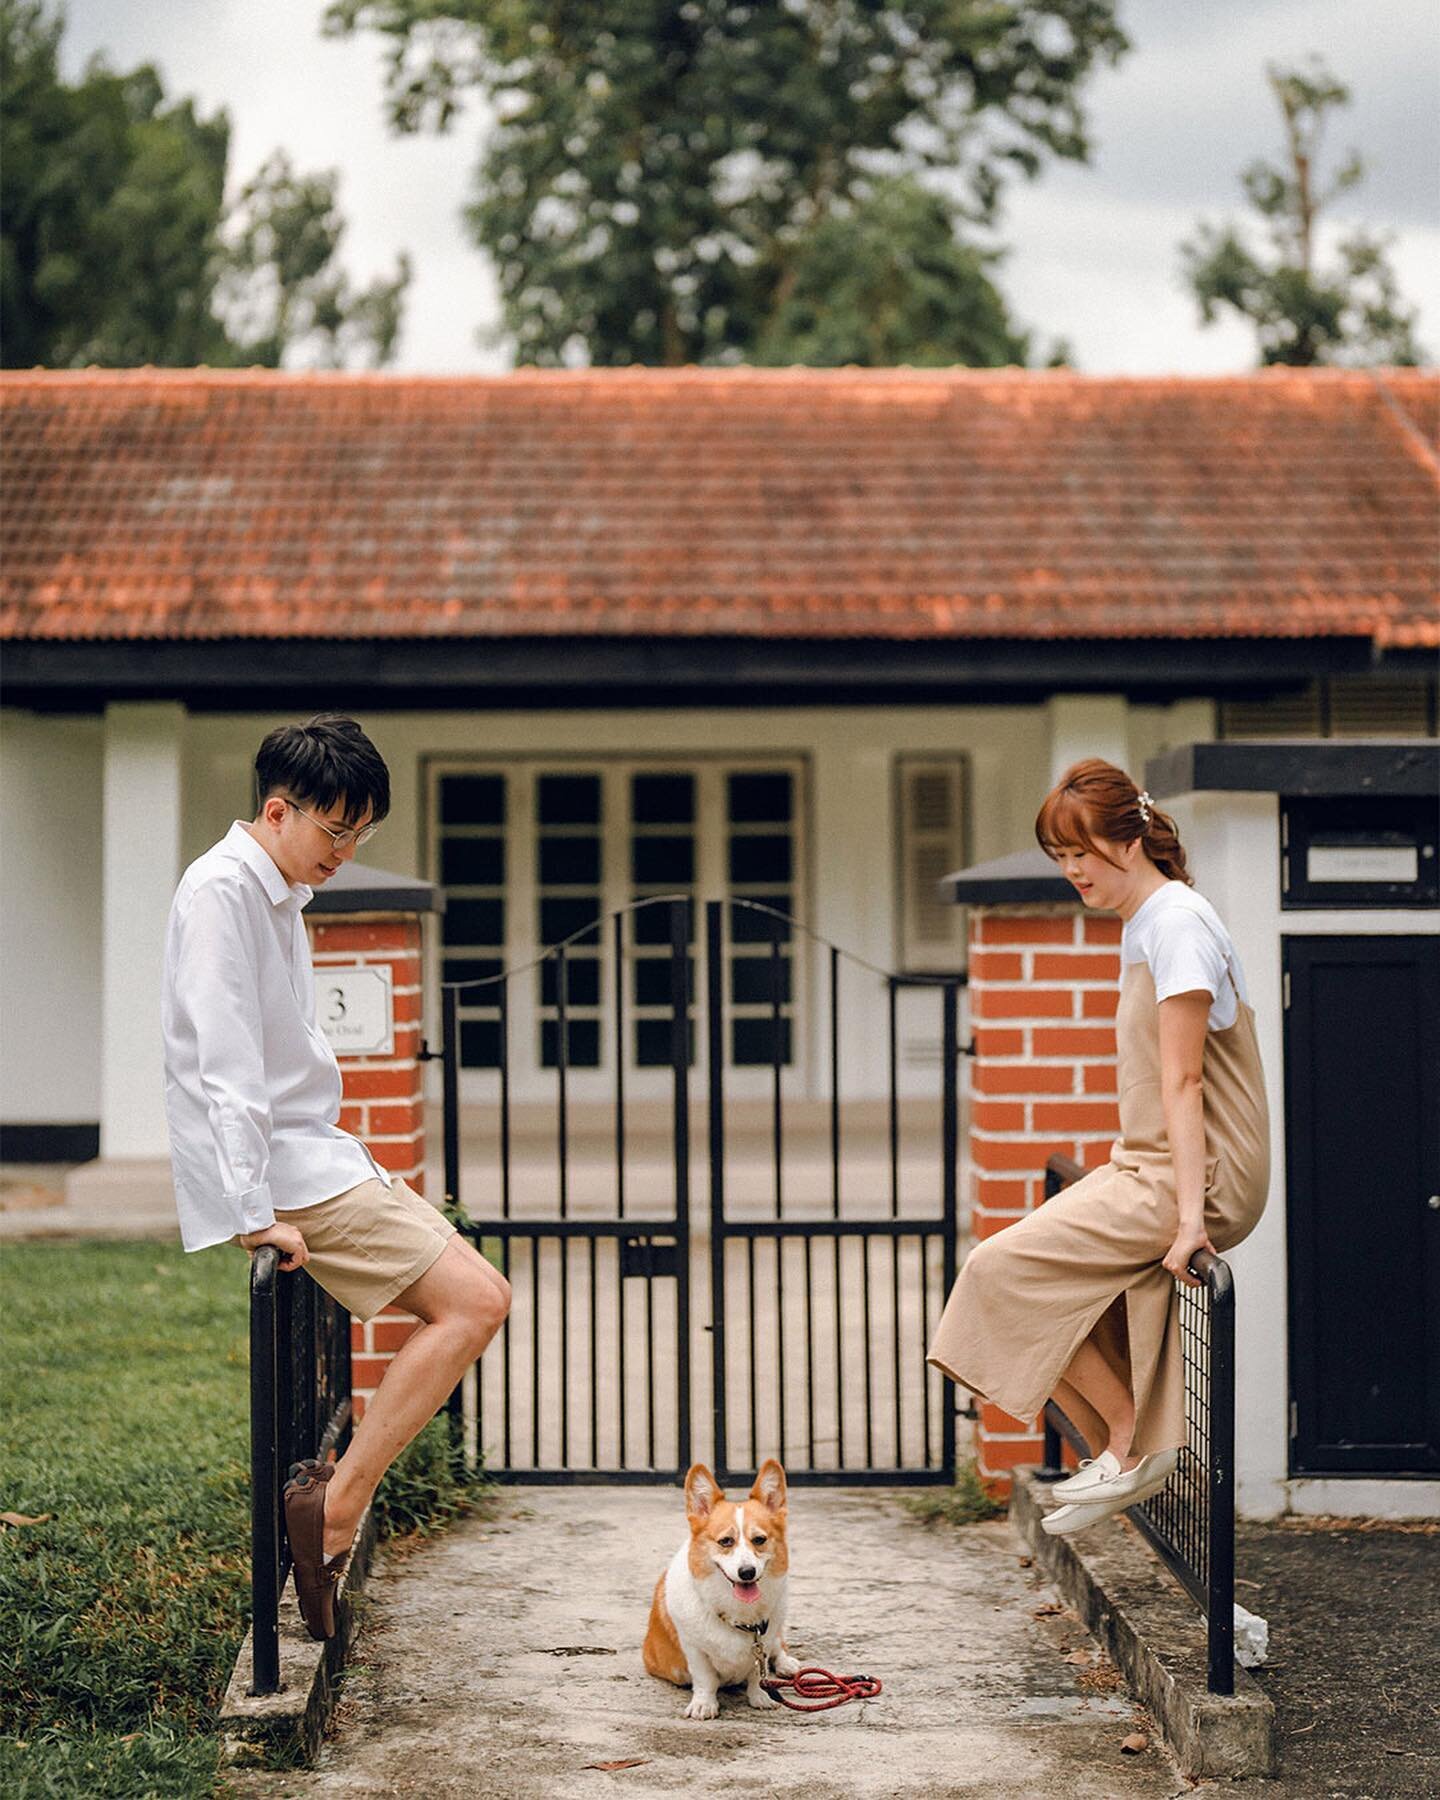 S &amp; B || Our hearts are just melting for this adorable couple and their pup 🥹❤️

📸 @michael.heystranger